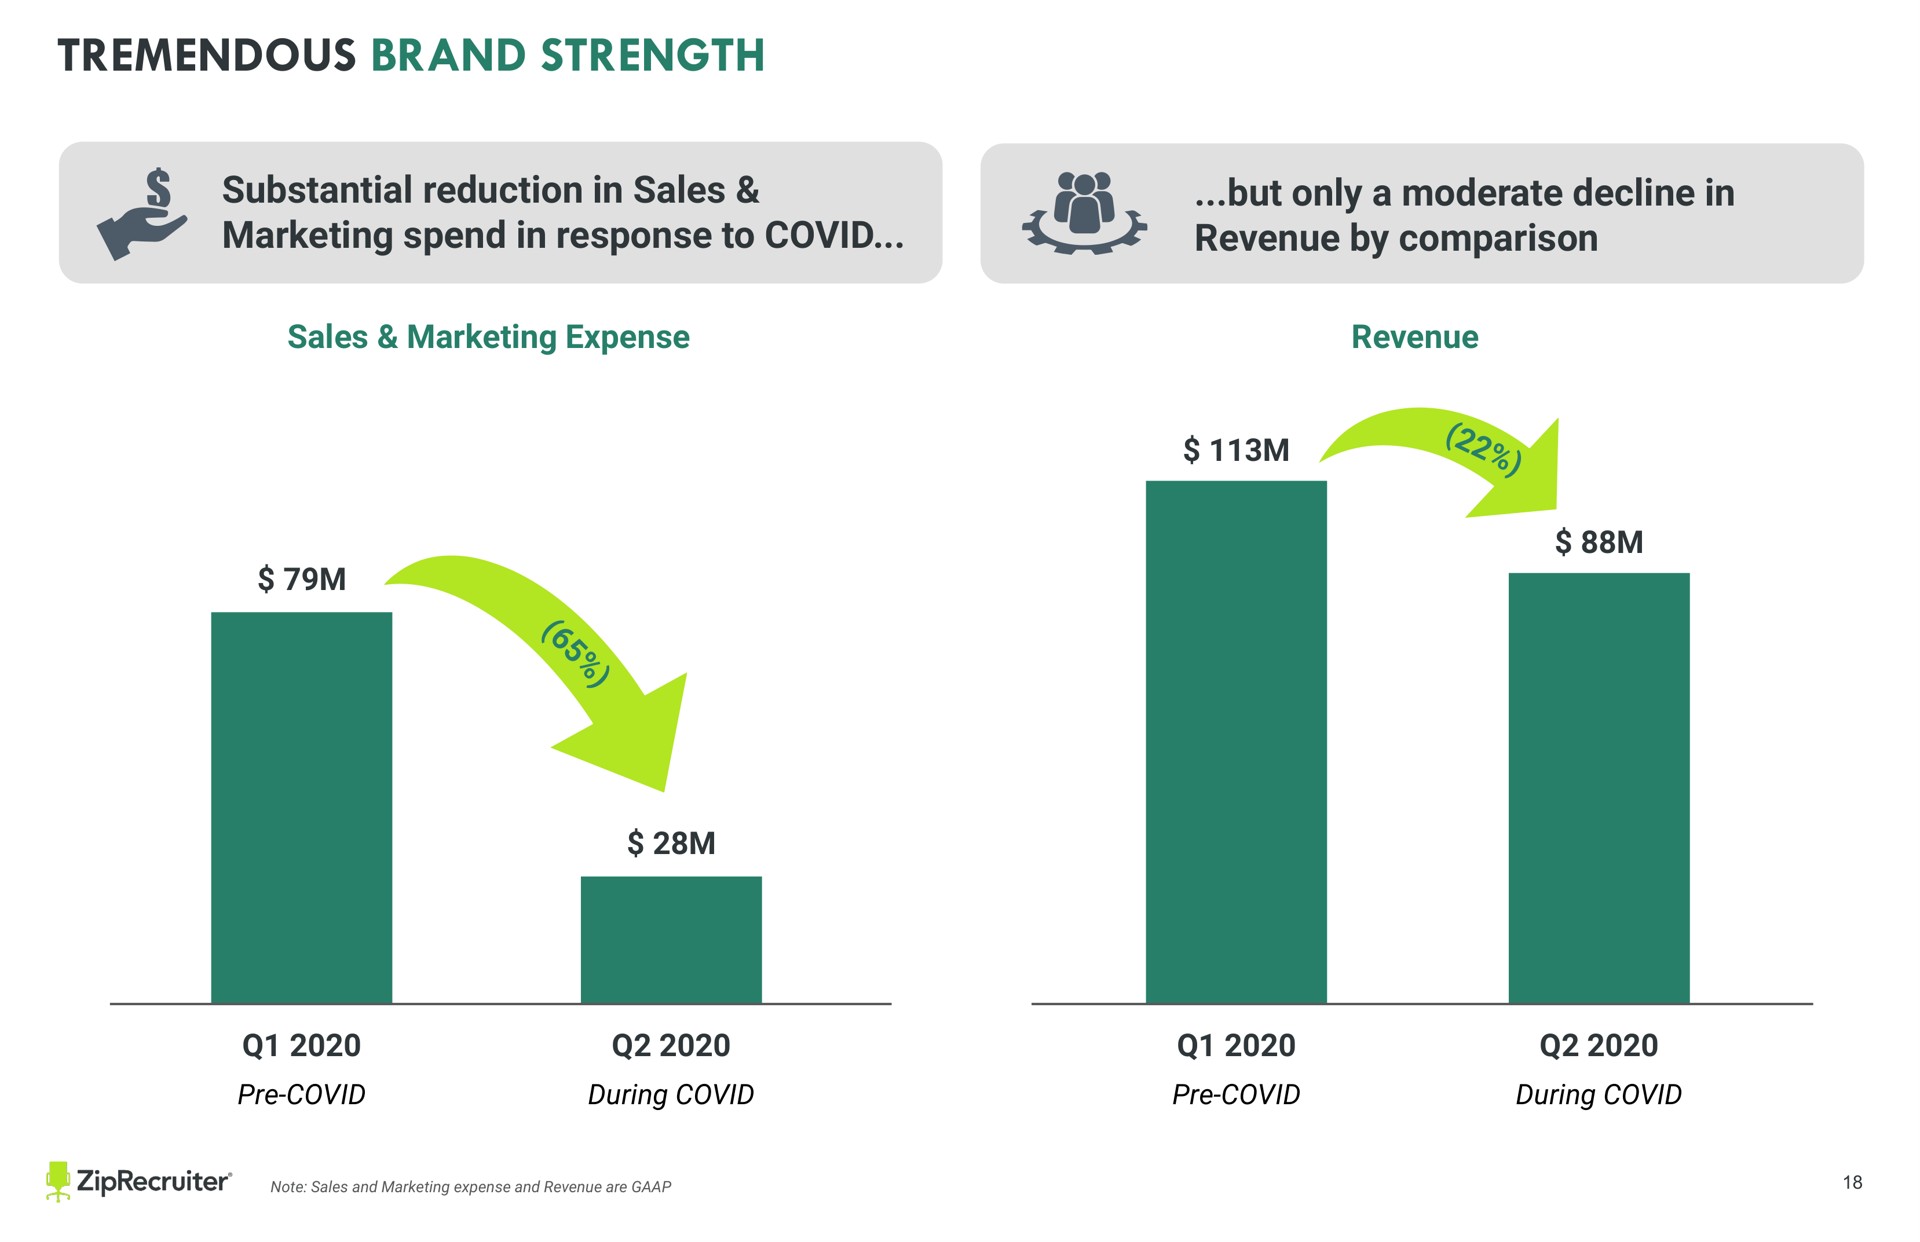 text a a a tremendous brand strength substantial reduction in sales marketing spend in response to covid but only a moderate decline in revenue by comparison sales marketing expense revenue covid during covid covid during covid keep all text and images other than full slide backgrounds from the sides of the slide to avoid being cut off when printed rog | ZipRecruiter